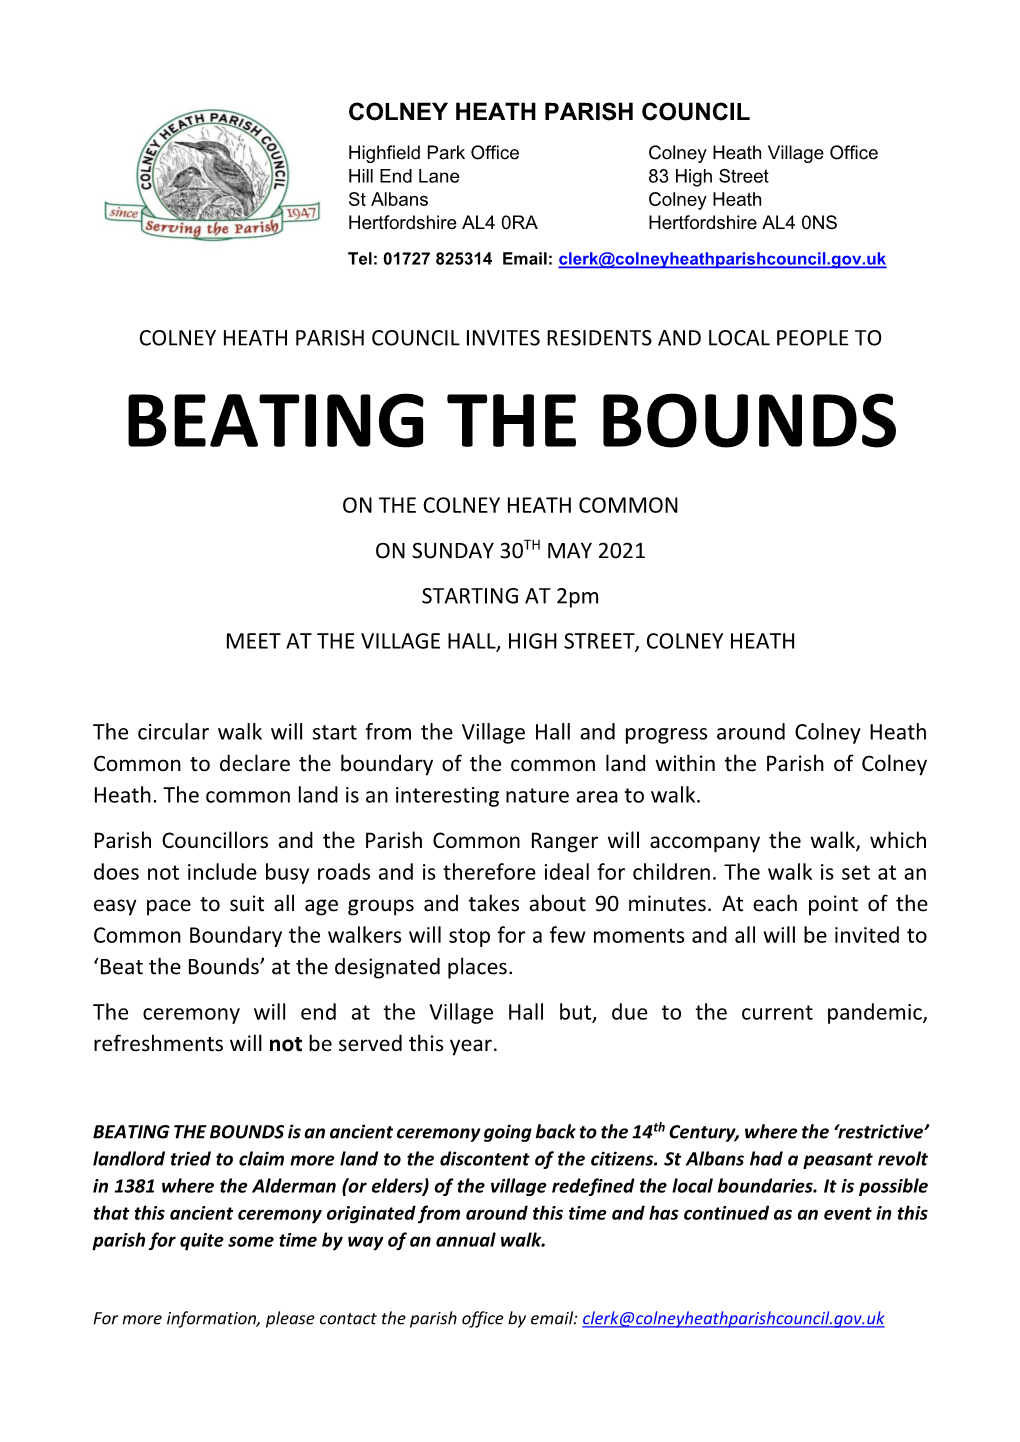 Beating the Bounds Poster 2021